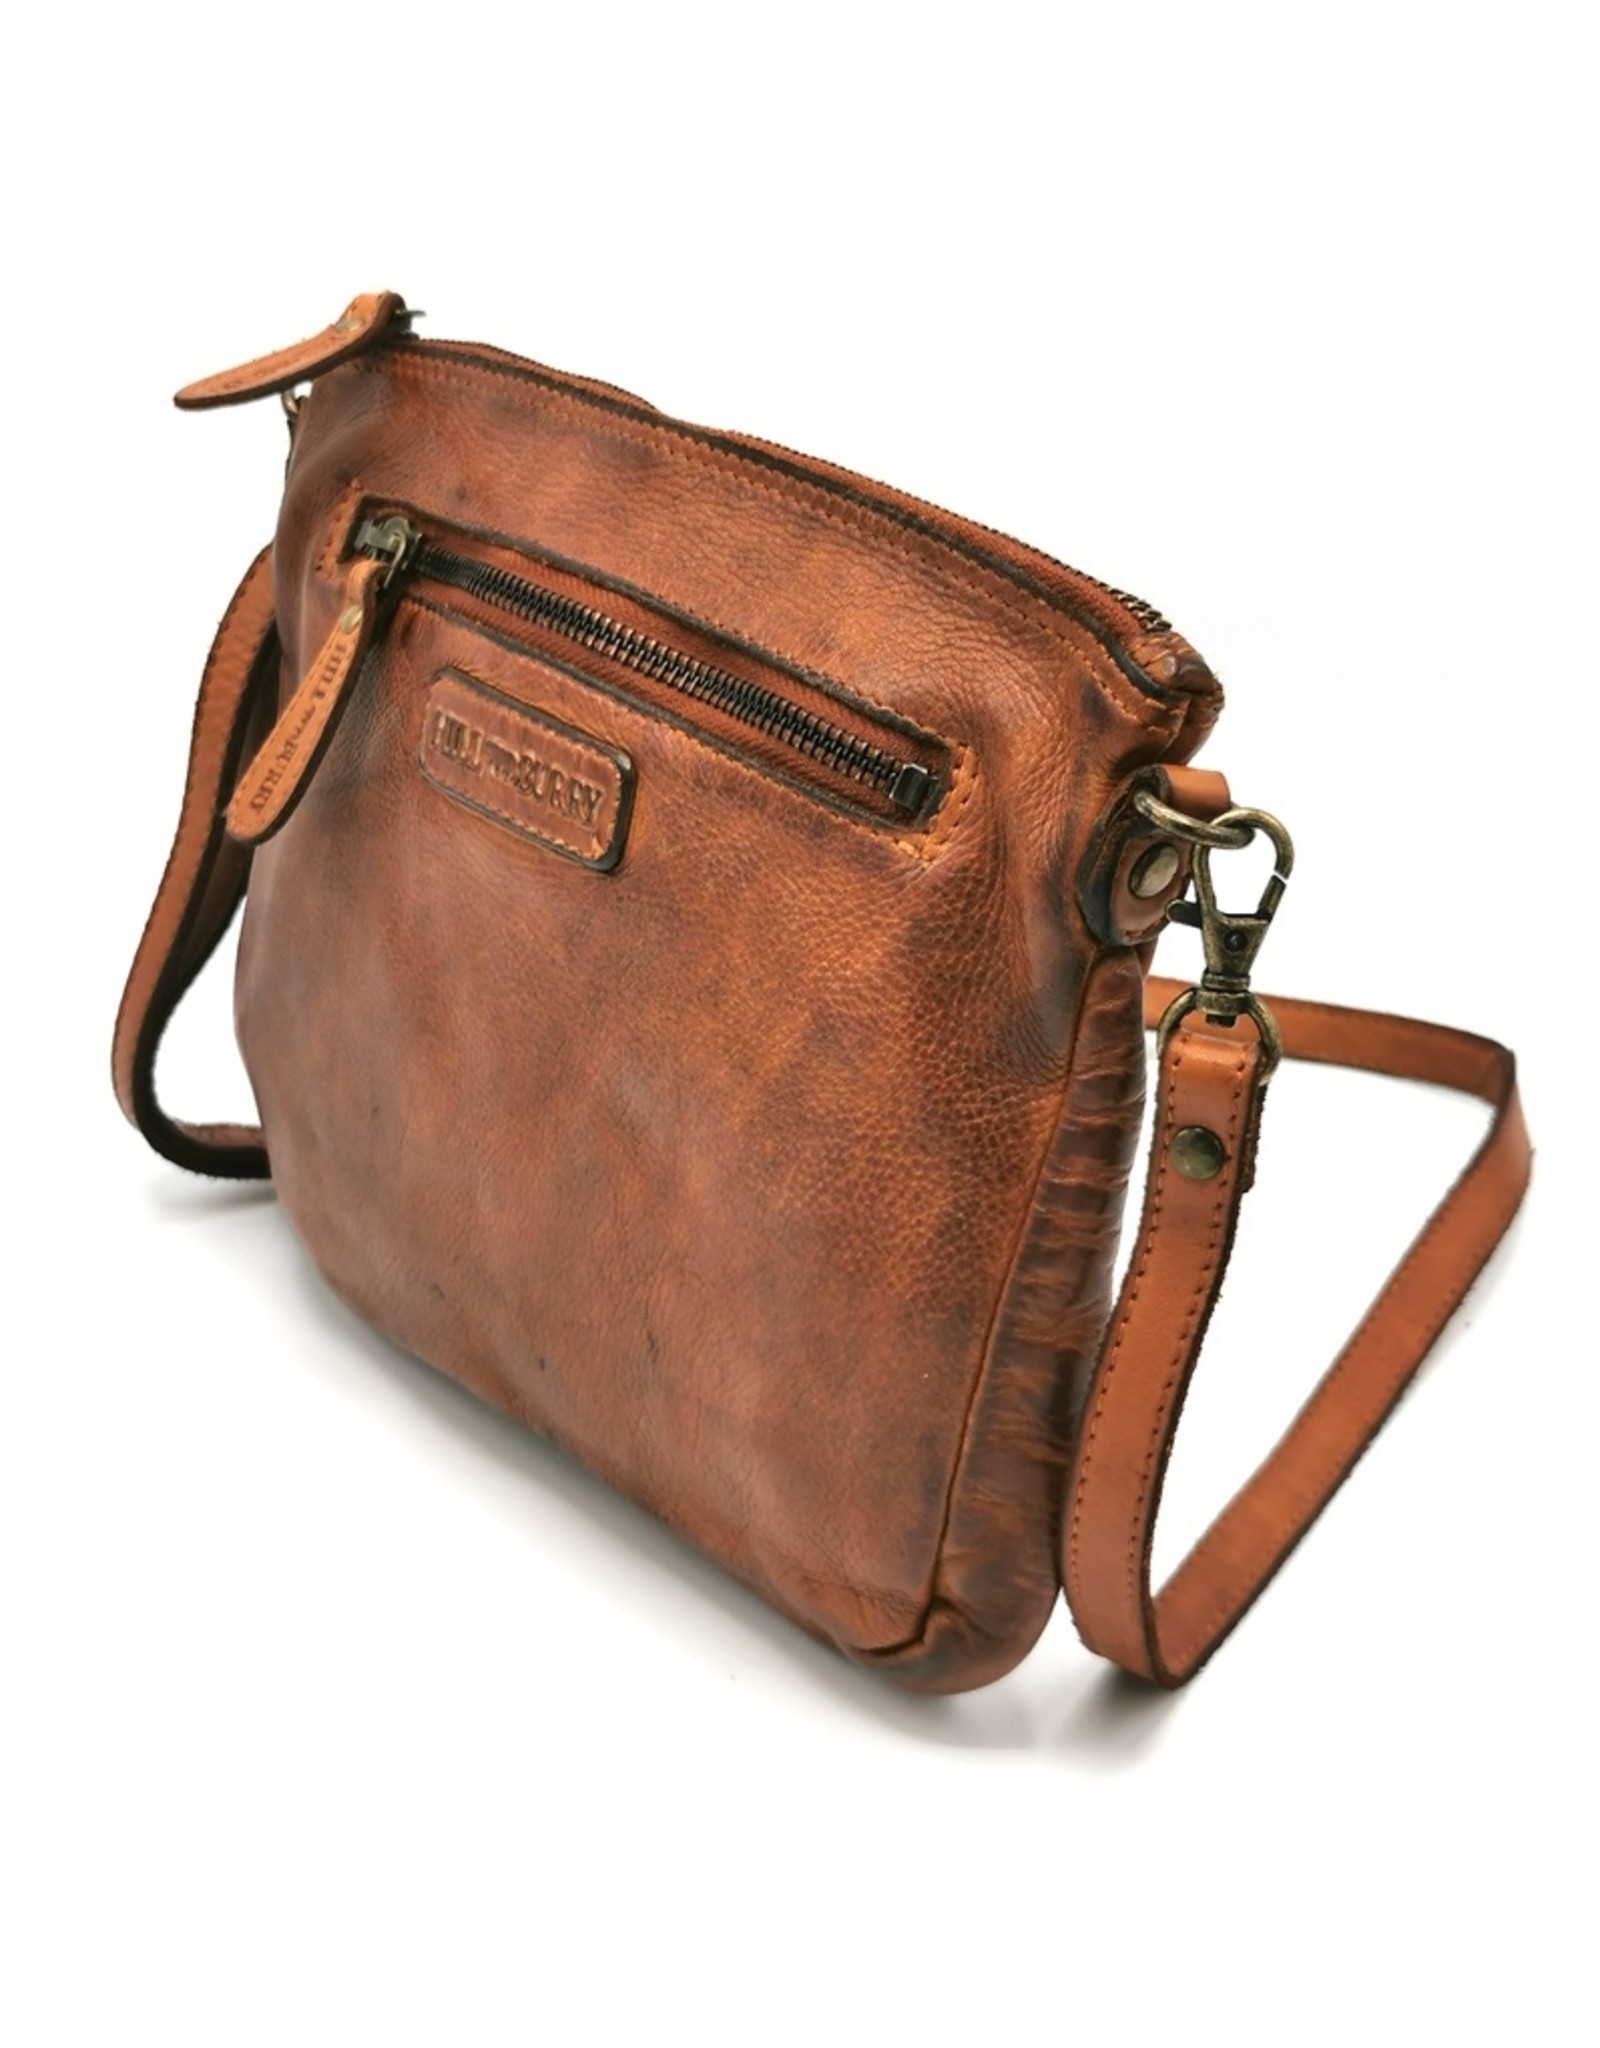 HillBurry Small leather bags, clutches and more - Hillburry Shoulder Bag - Clutch Washed Leather tan